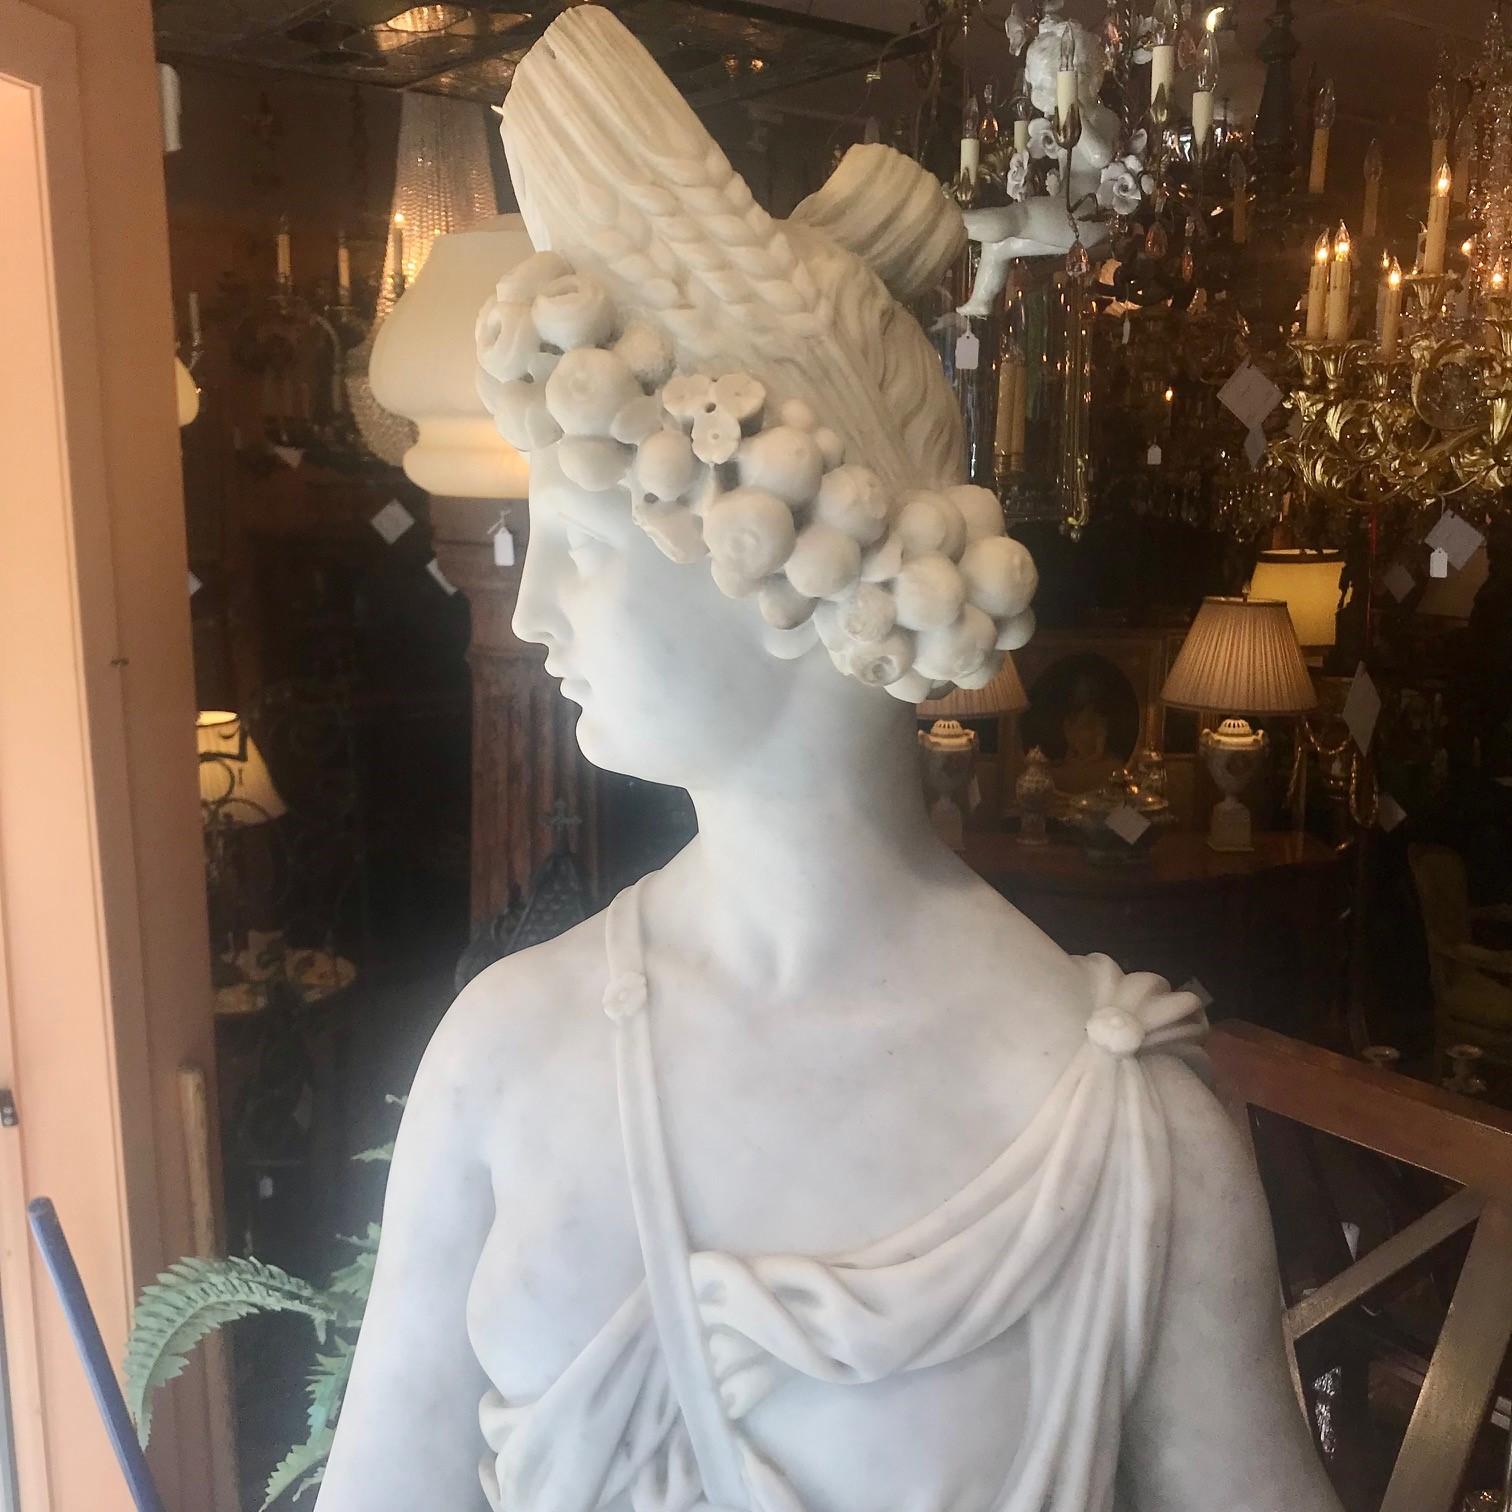 Near Life-Sized Italian White Marble Figure of Ceres, After the Antique 1